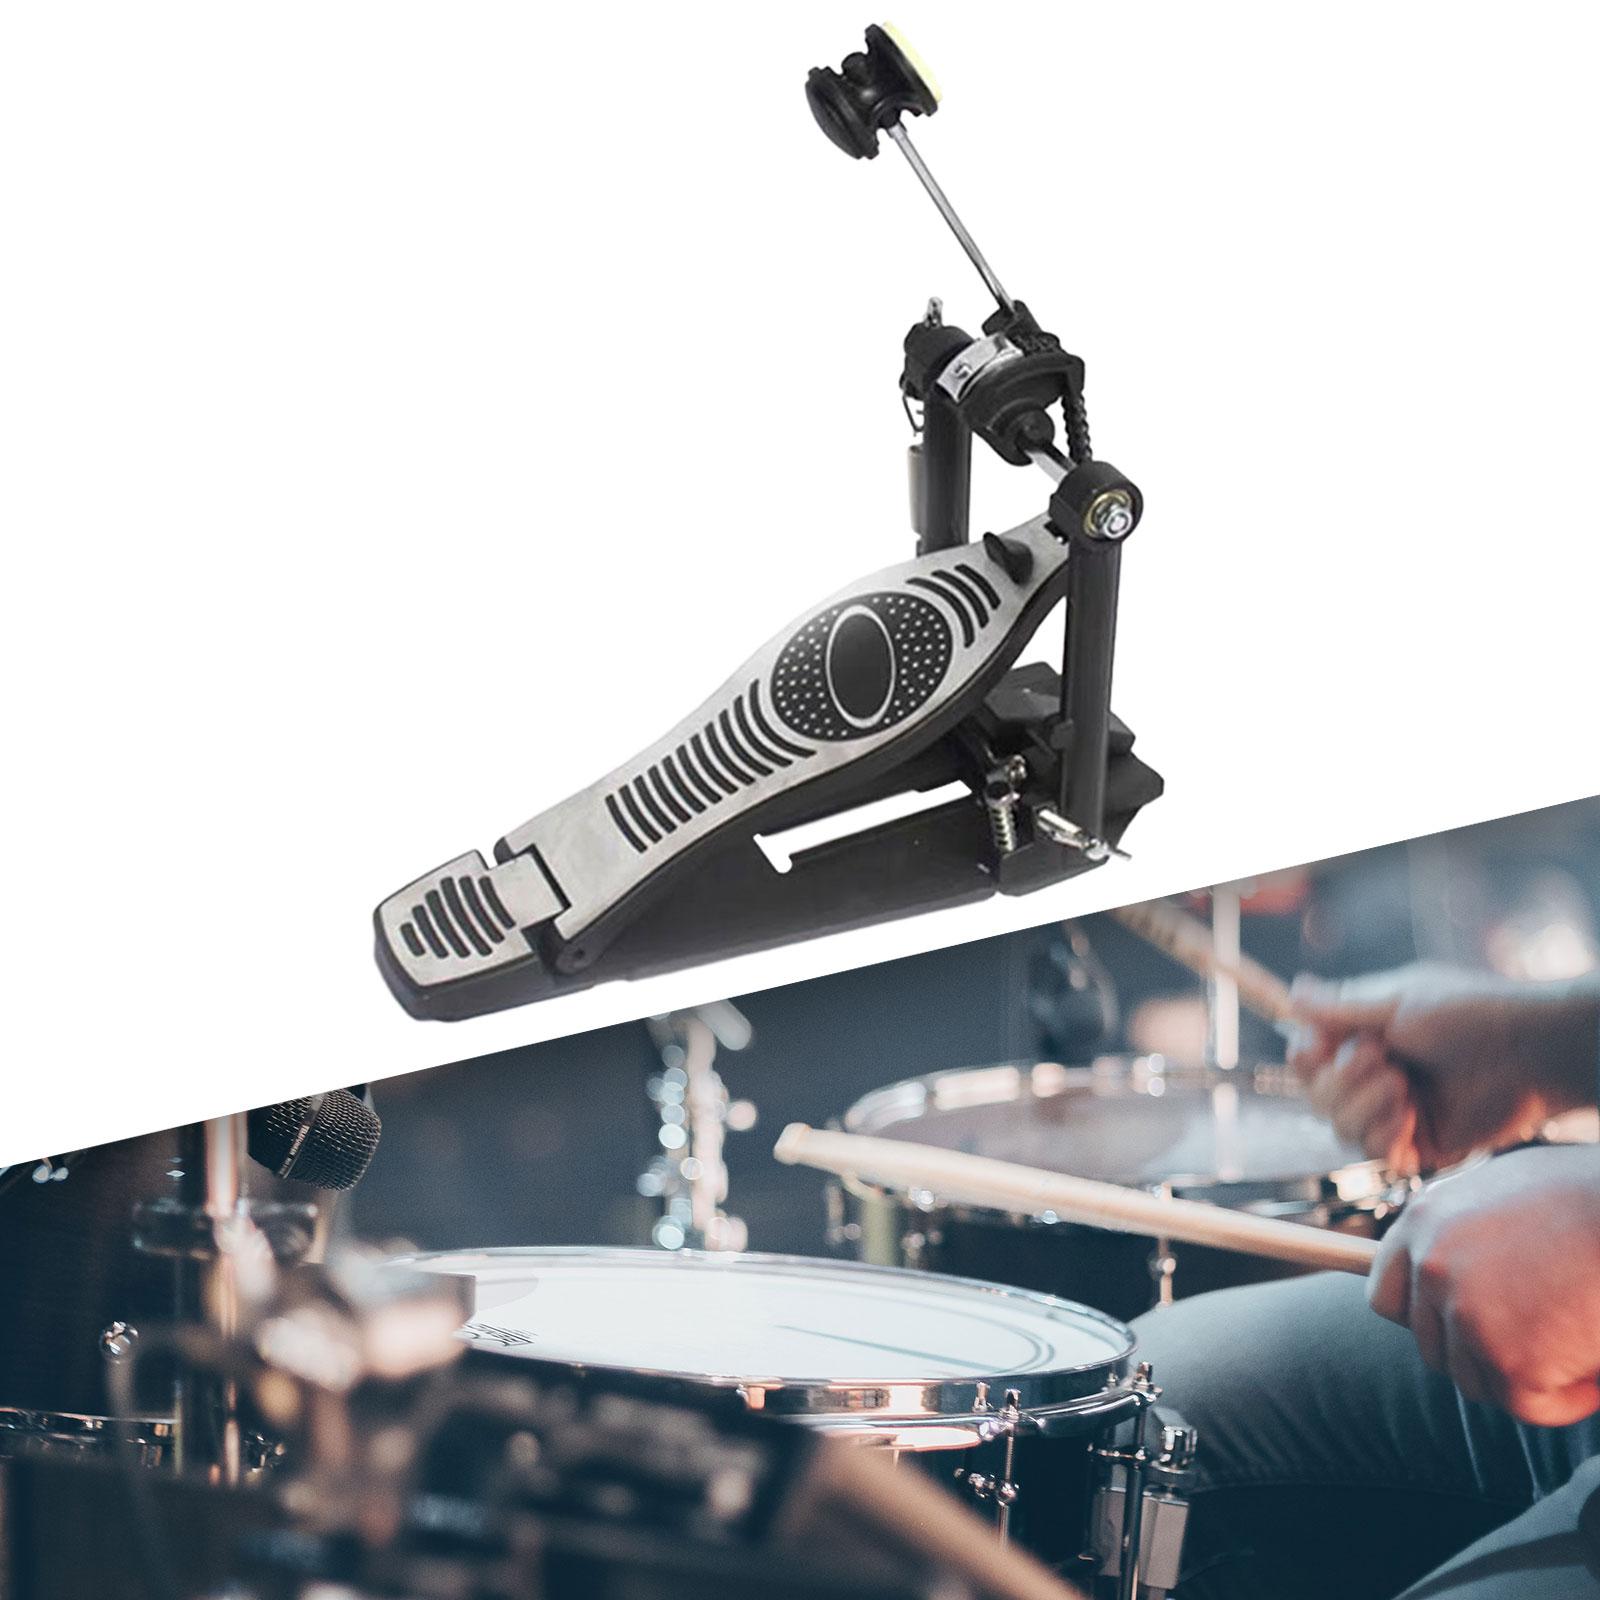 Bass Drum Pedal Drum Accessories for Electronic Drums Heavy Duty Replacement